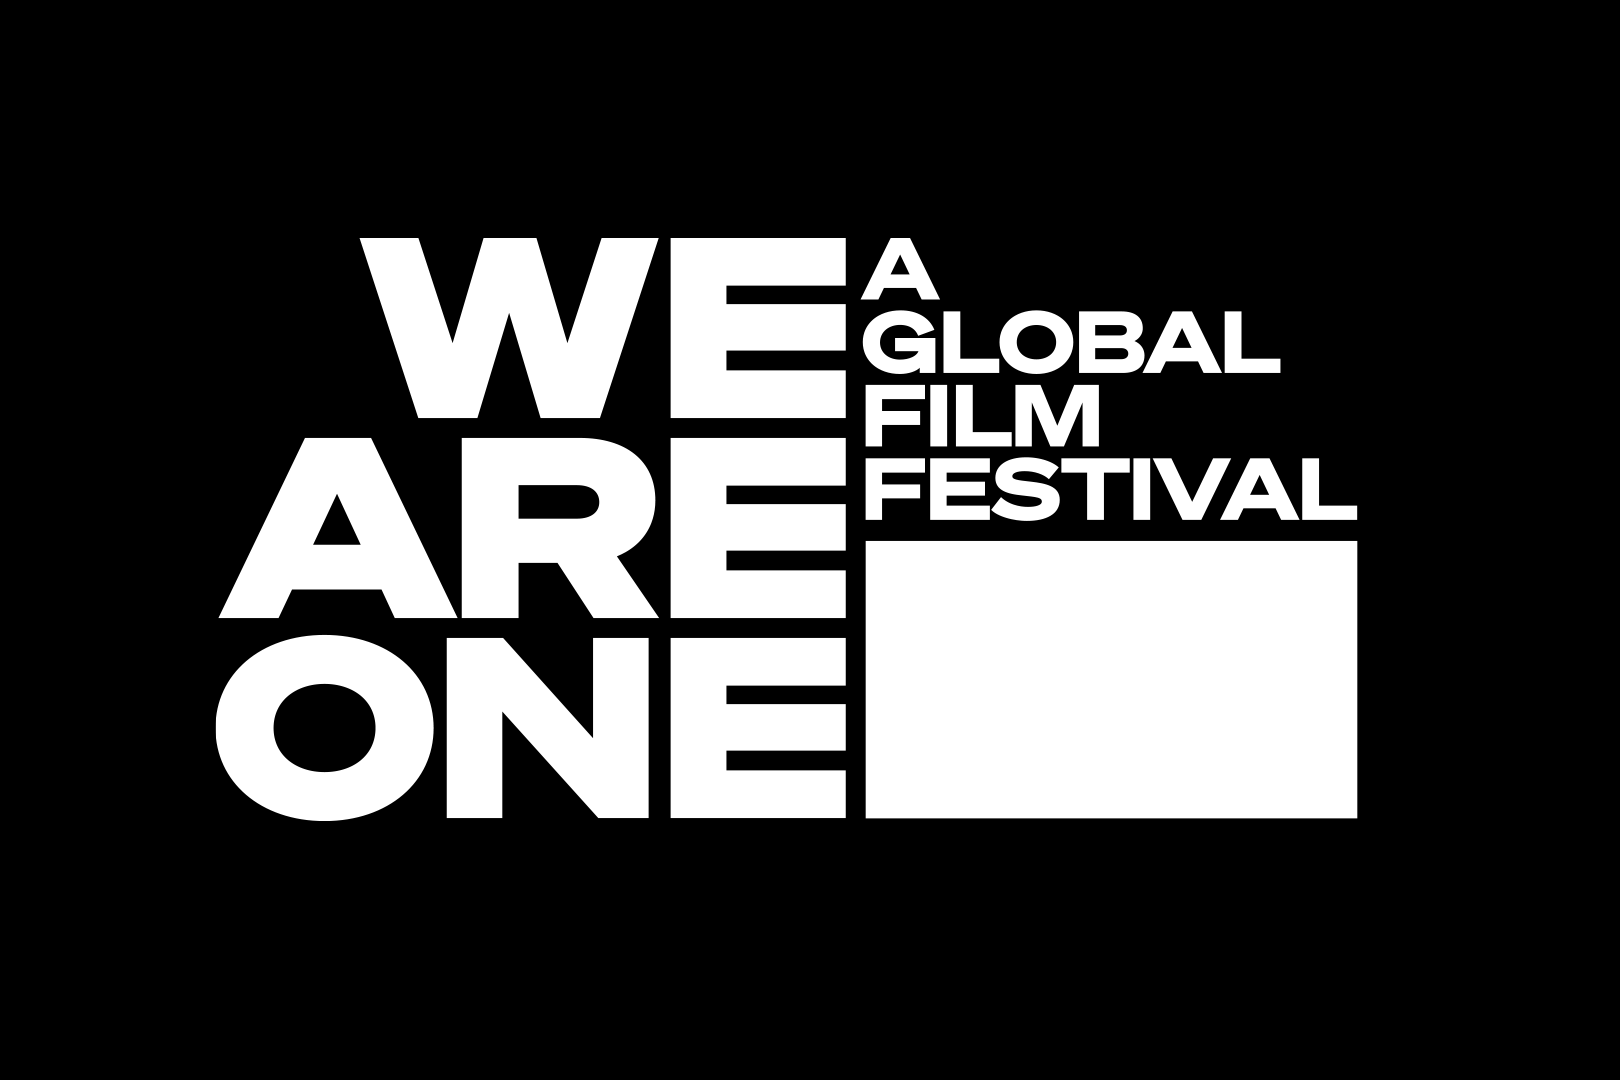 We Are One global film festival announces line-up | News | Screen